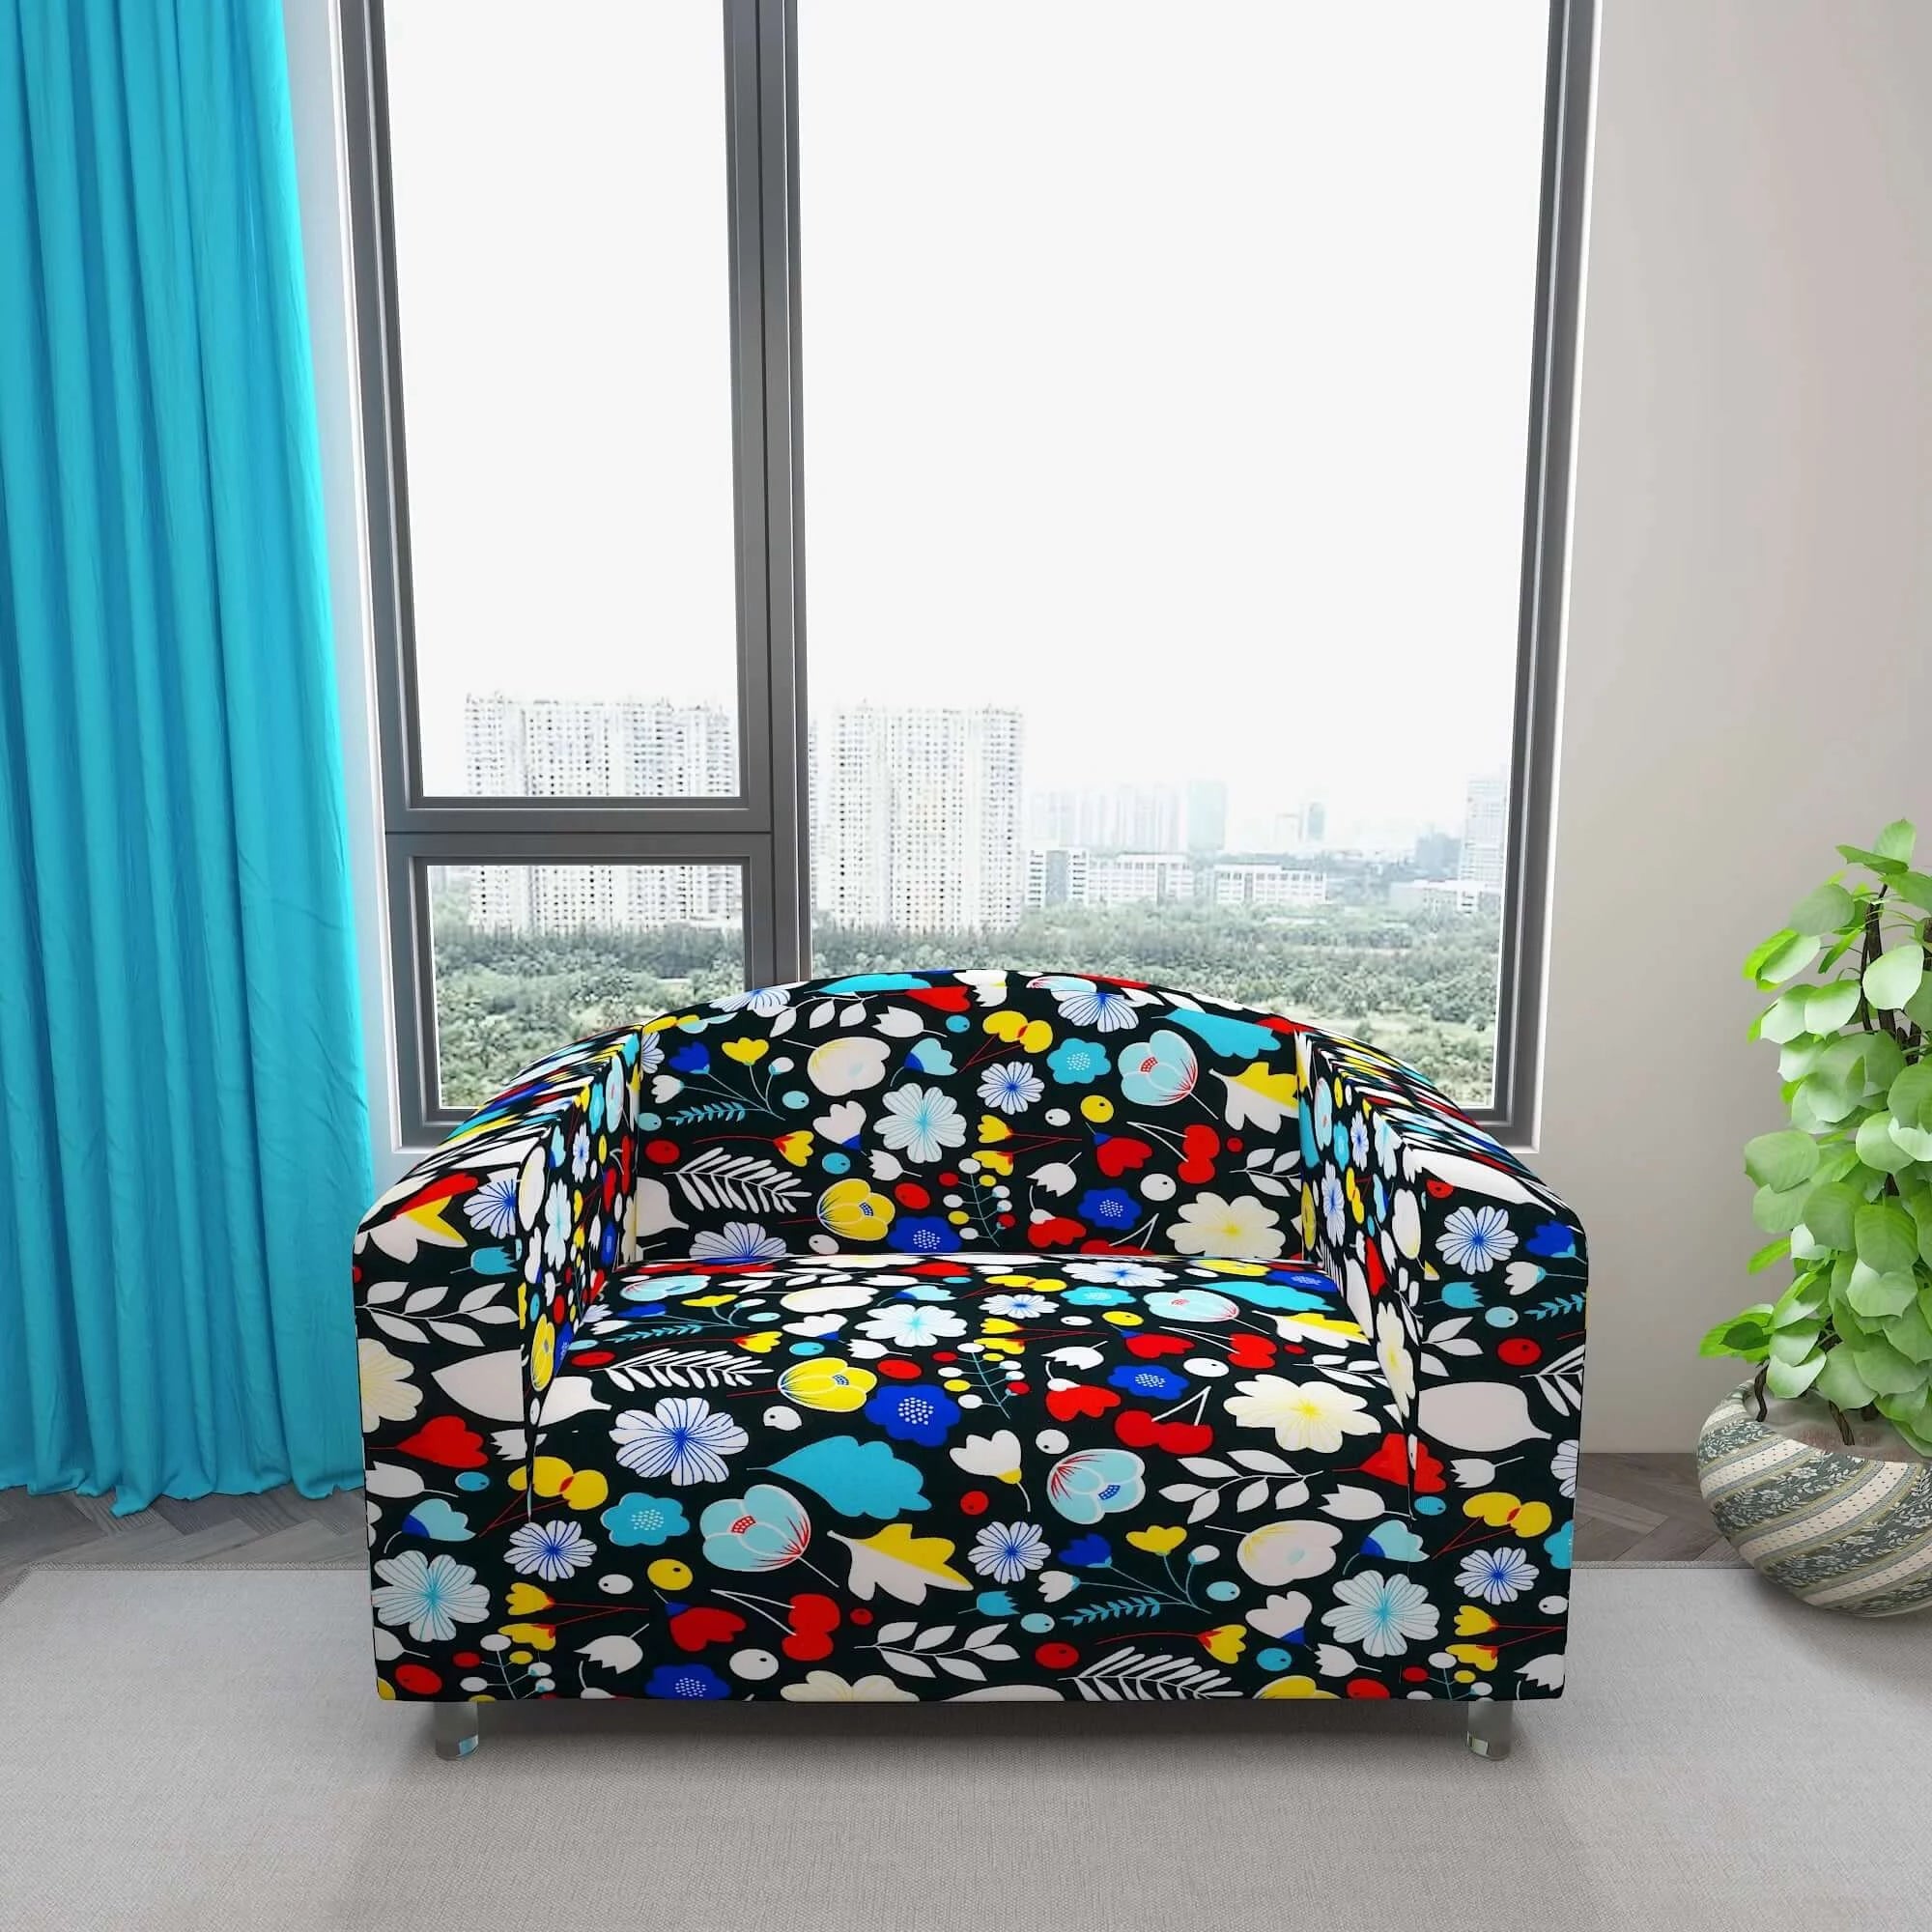 Marigold Printed Sofa Protector Cover Full Stretchable, MG05 - Dream Care Furnishings Private Limited